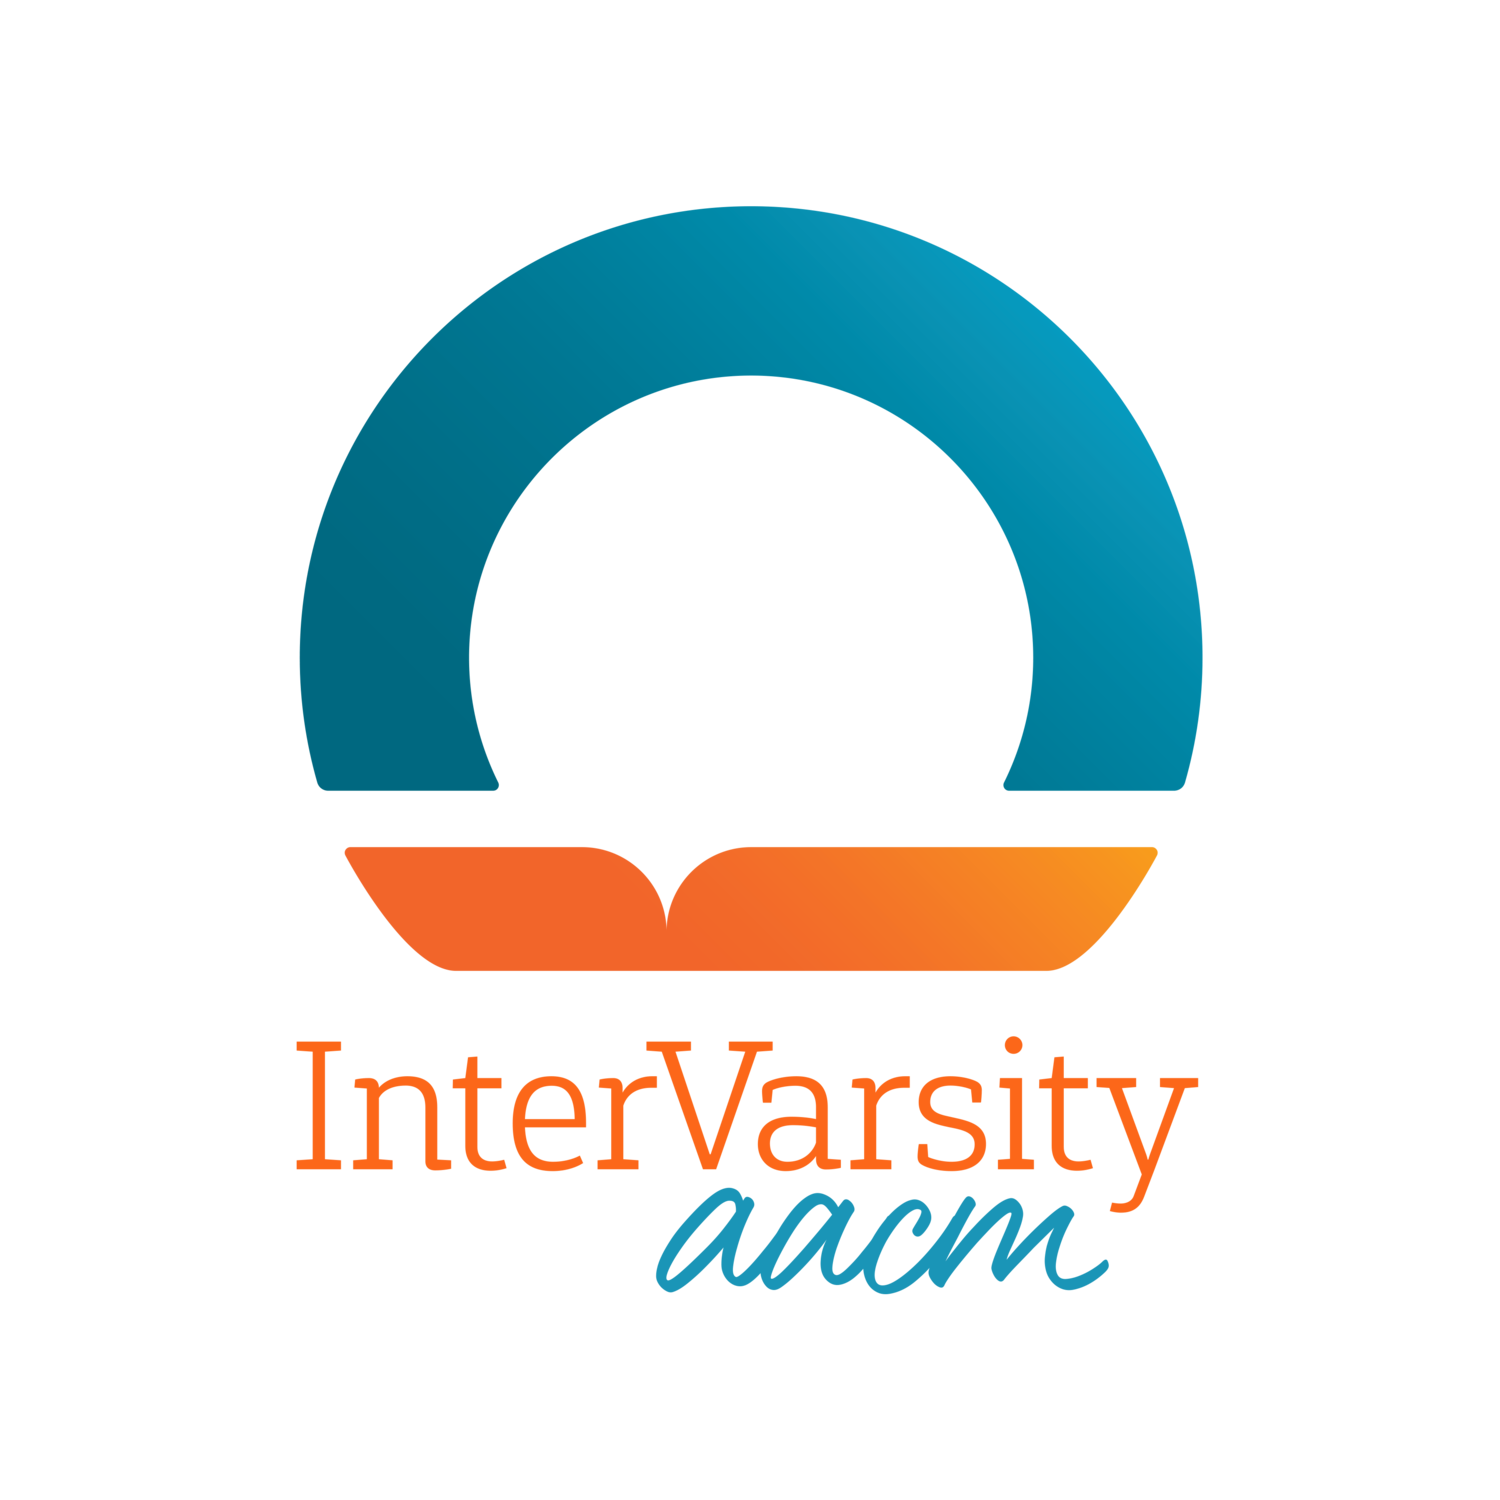 Asian American Campus Ministry InterVarsity